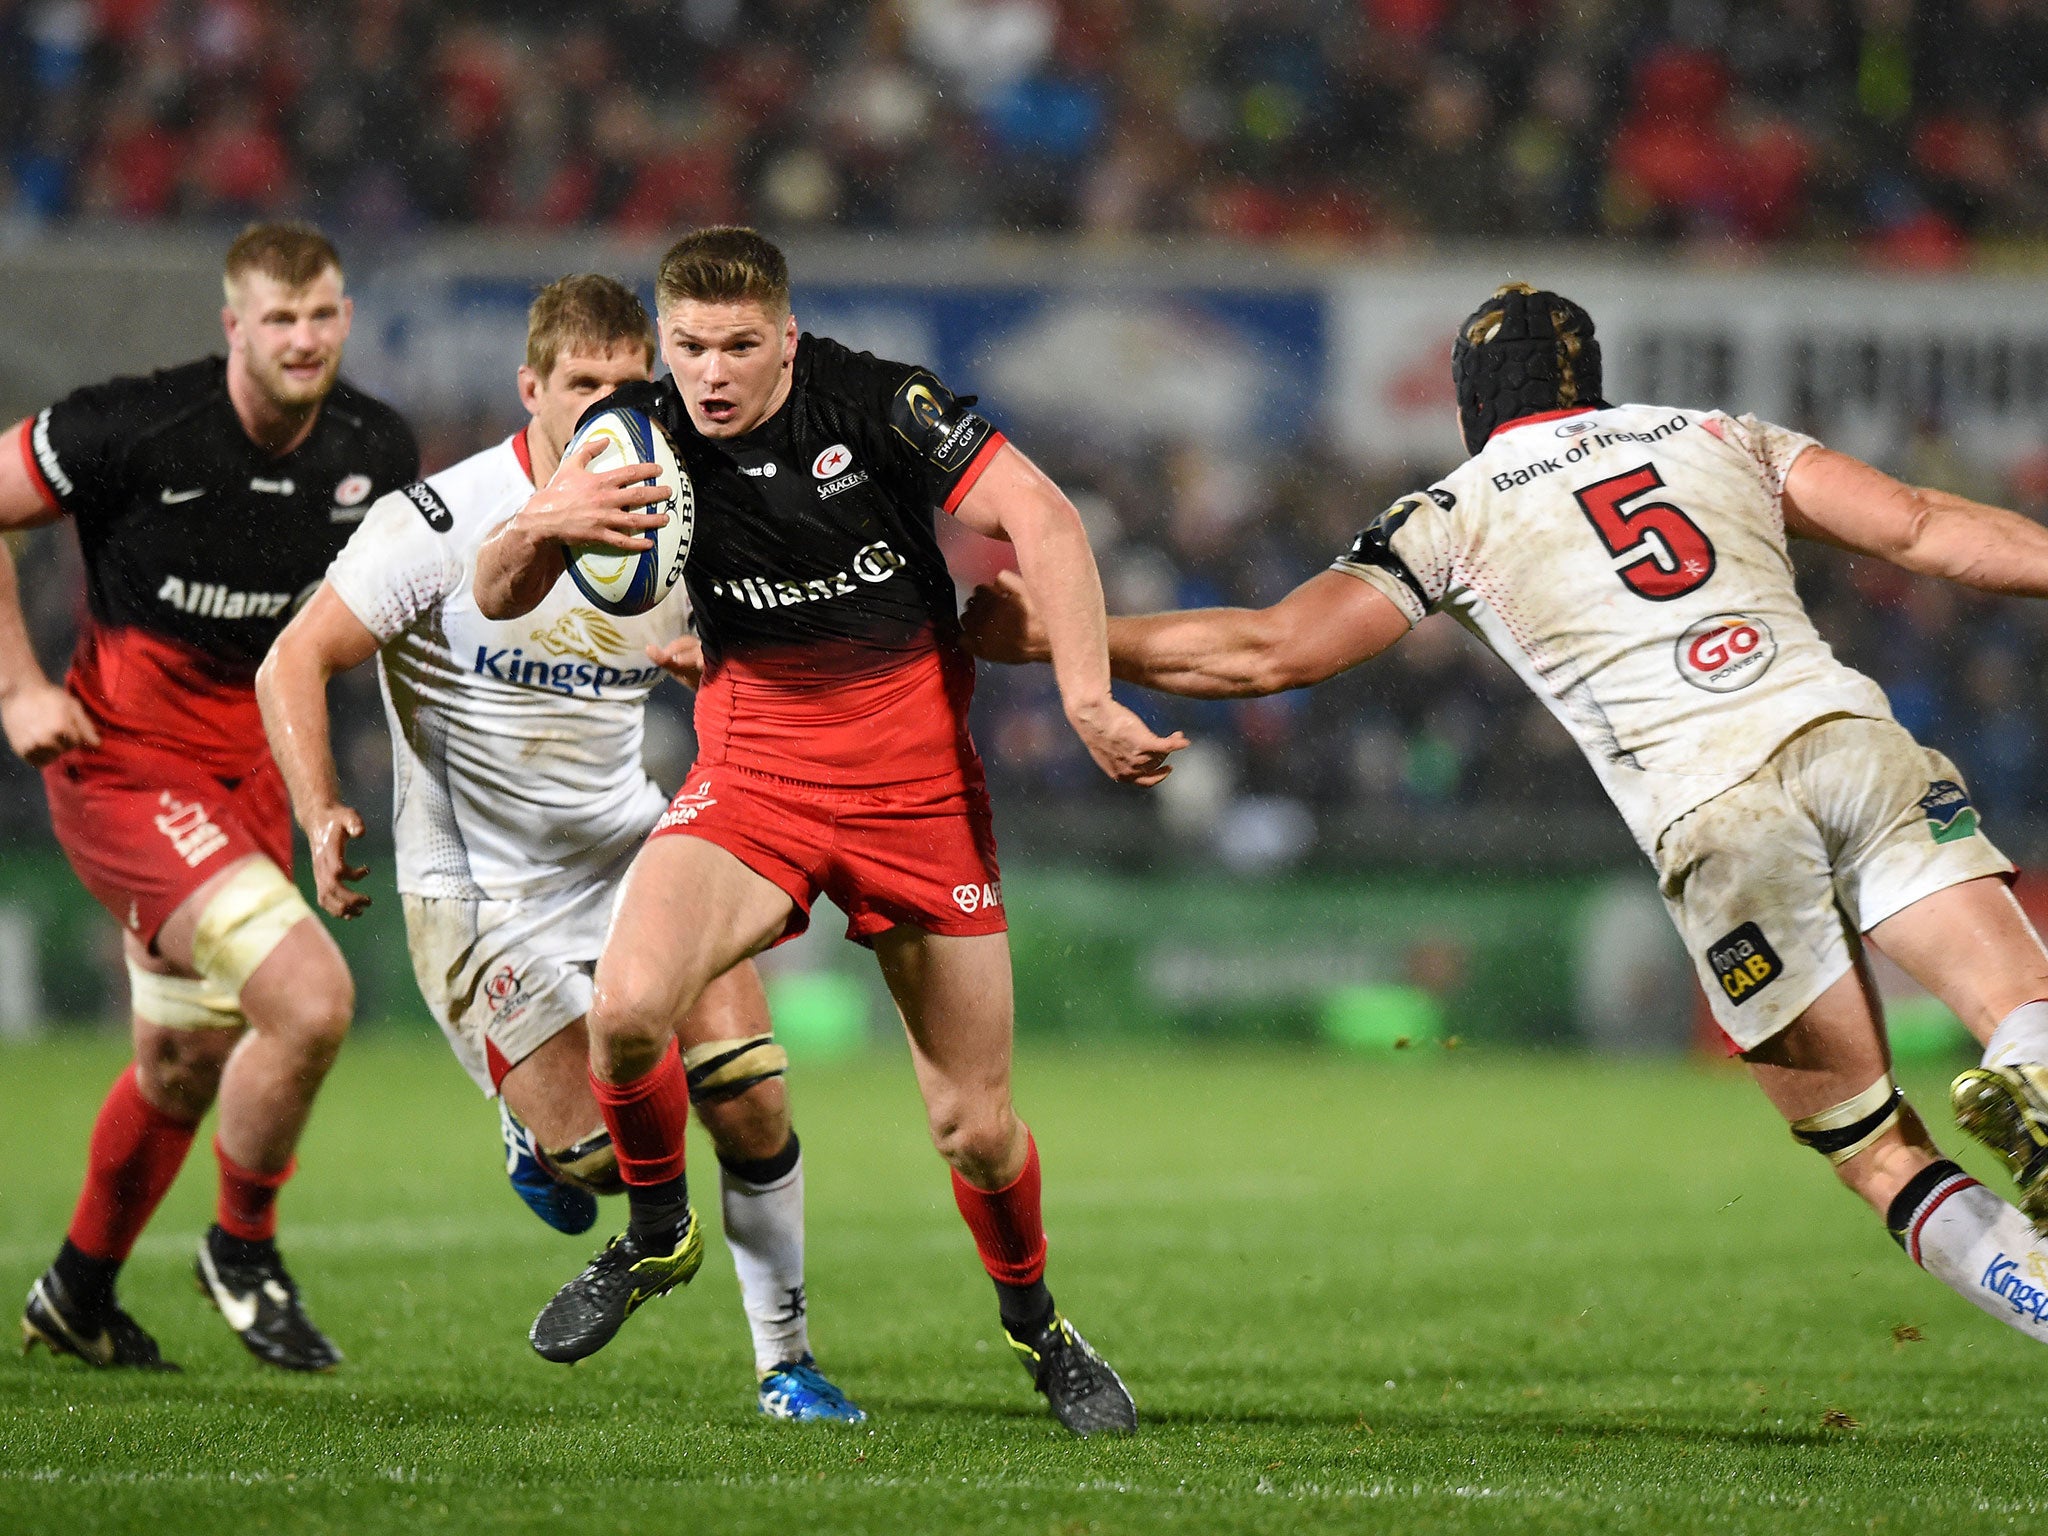 Saracens fly-half Owen Farrell cuts through the Ulster defence